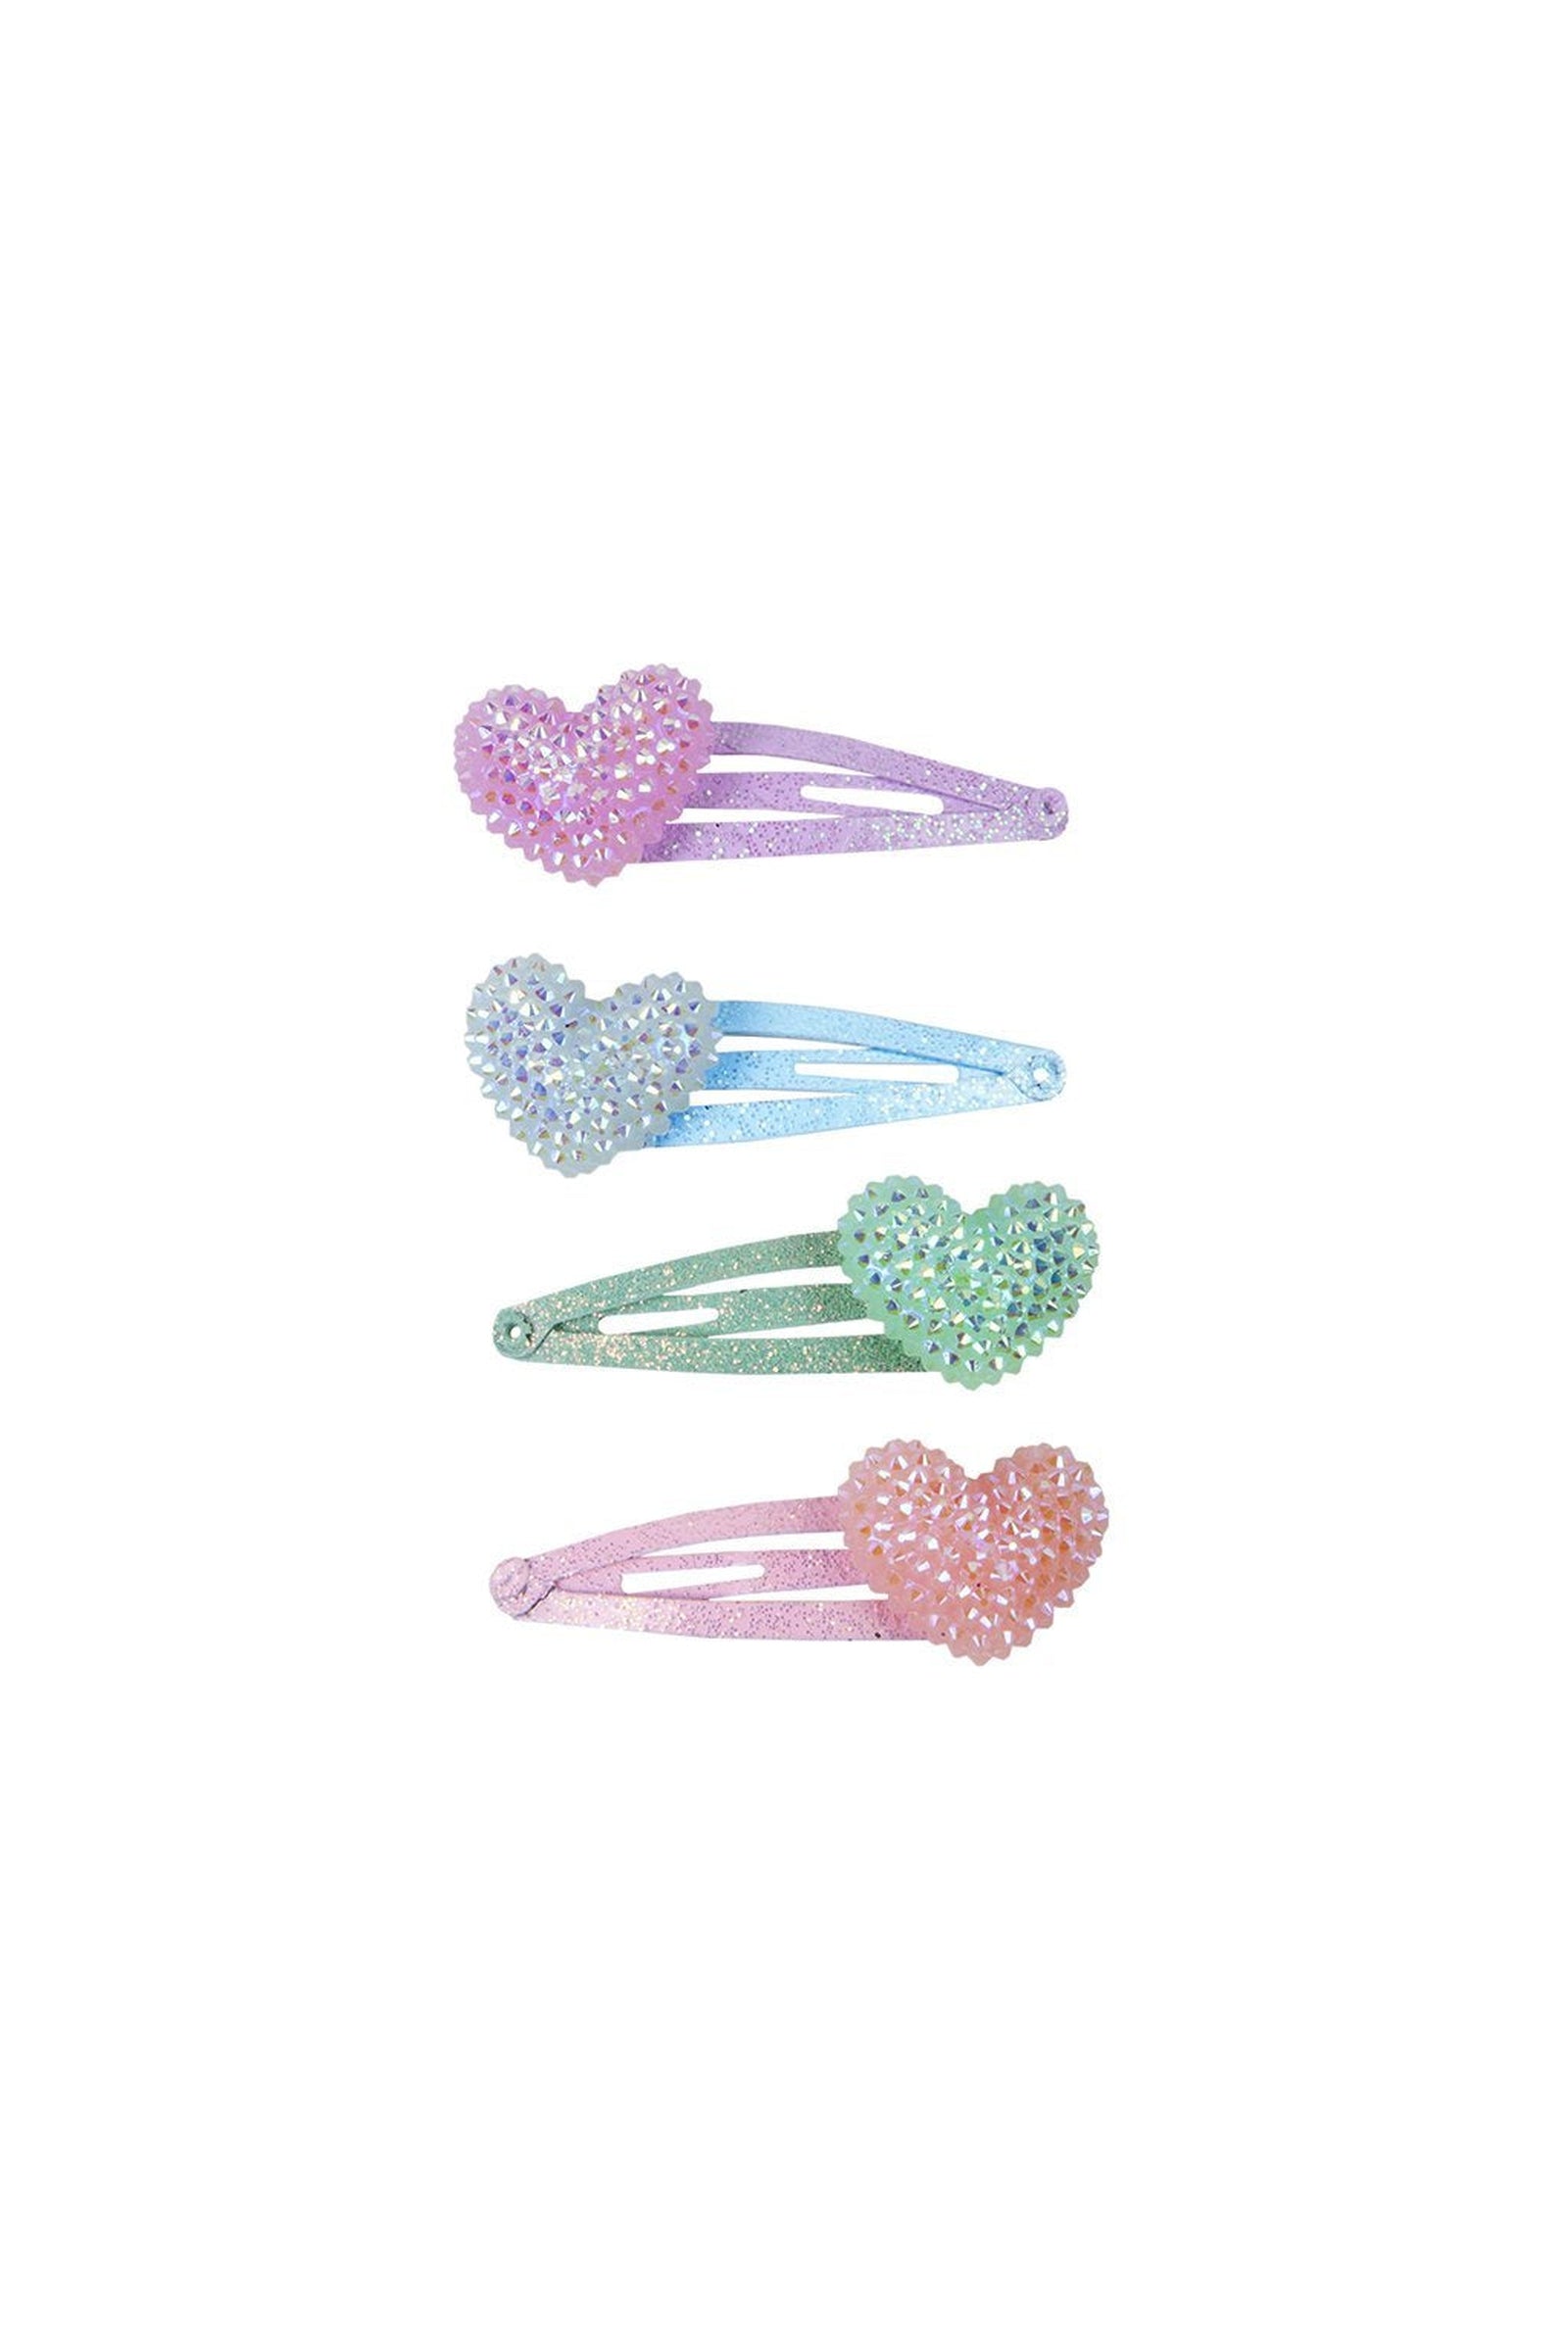 9pcs Women's Hair Clips Set With Red Heart Decor(random Delivery)